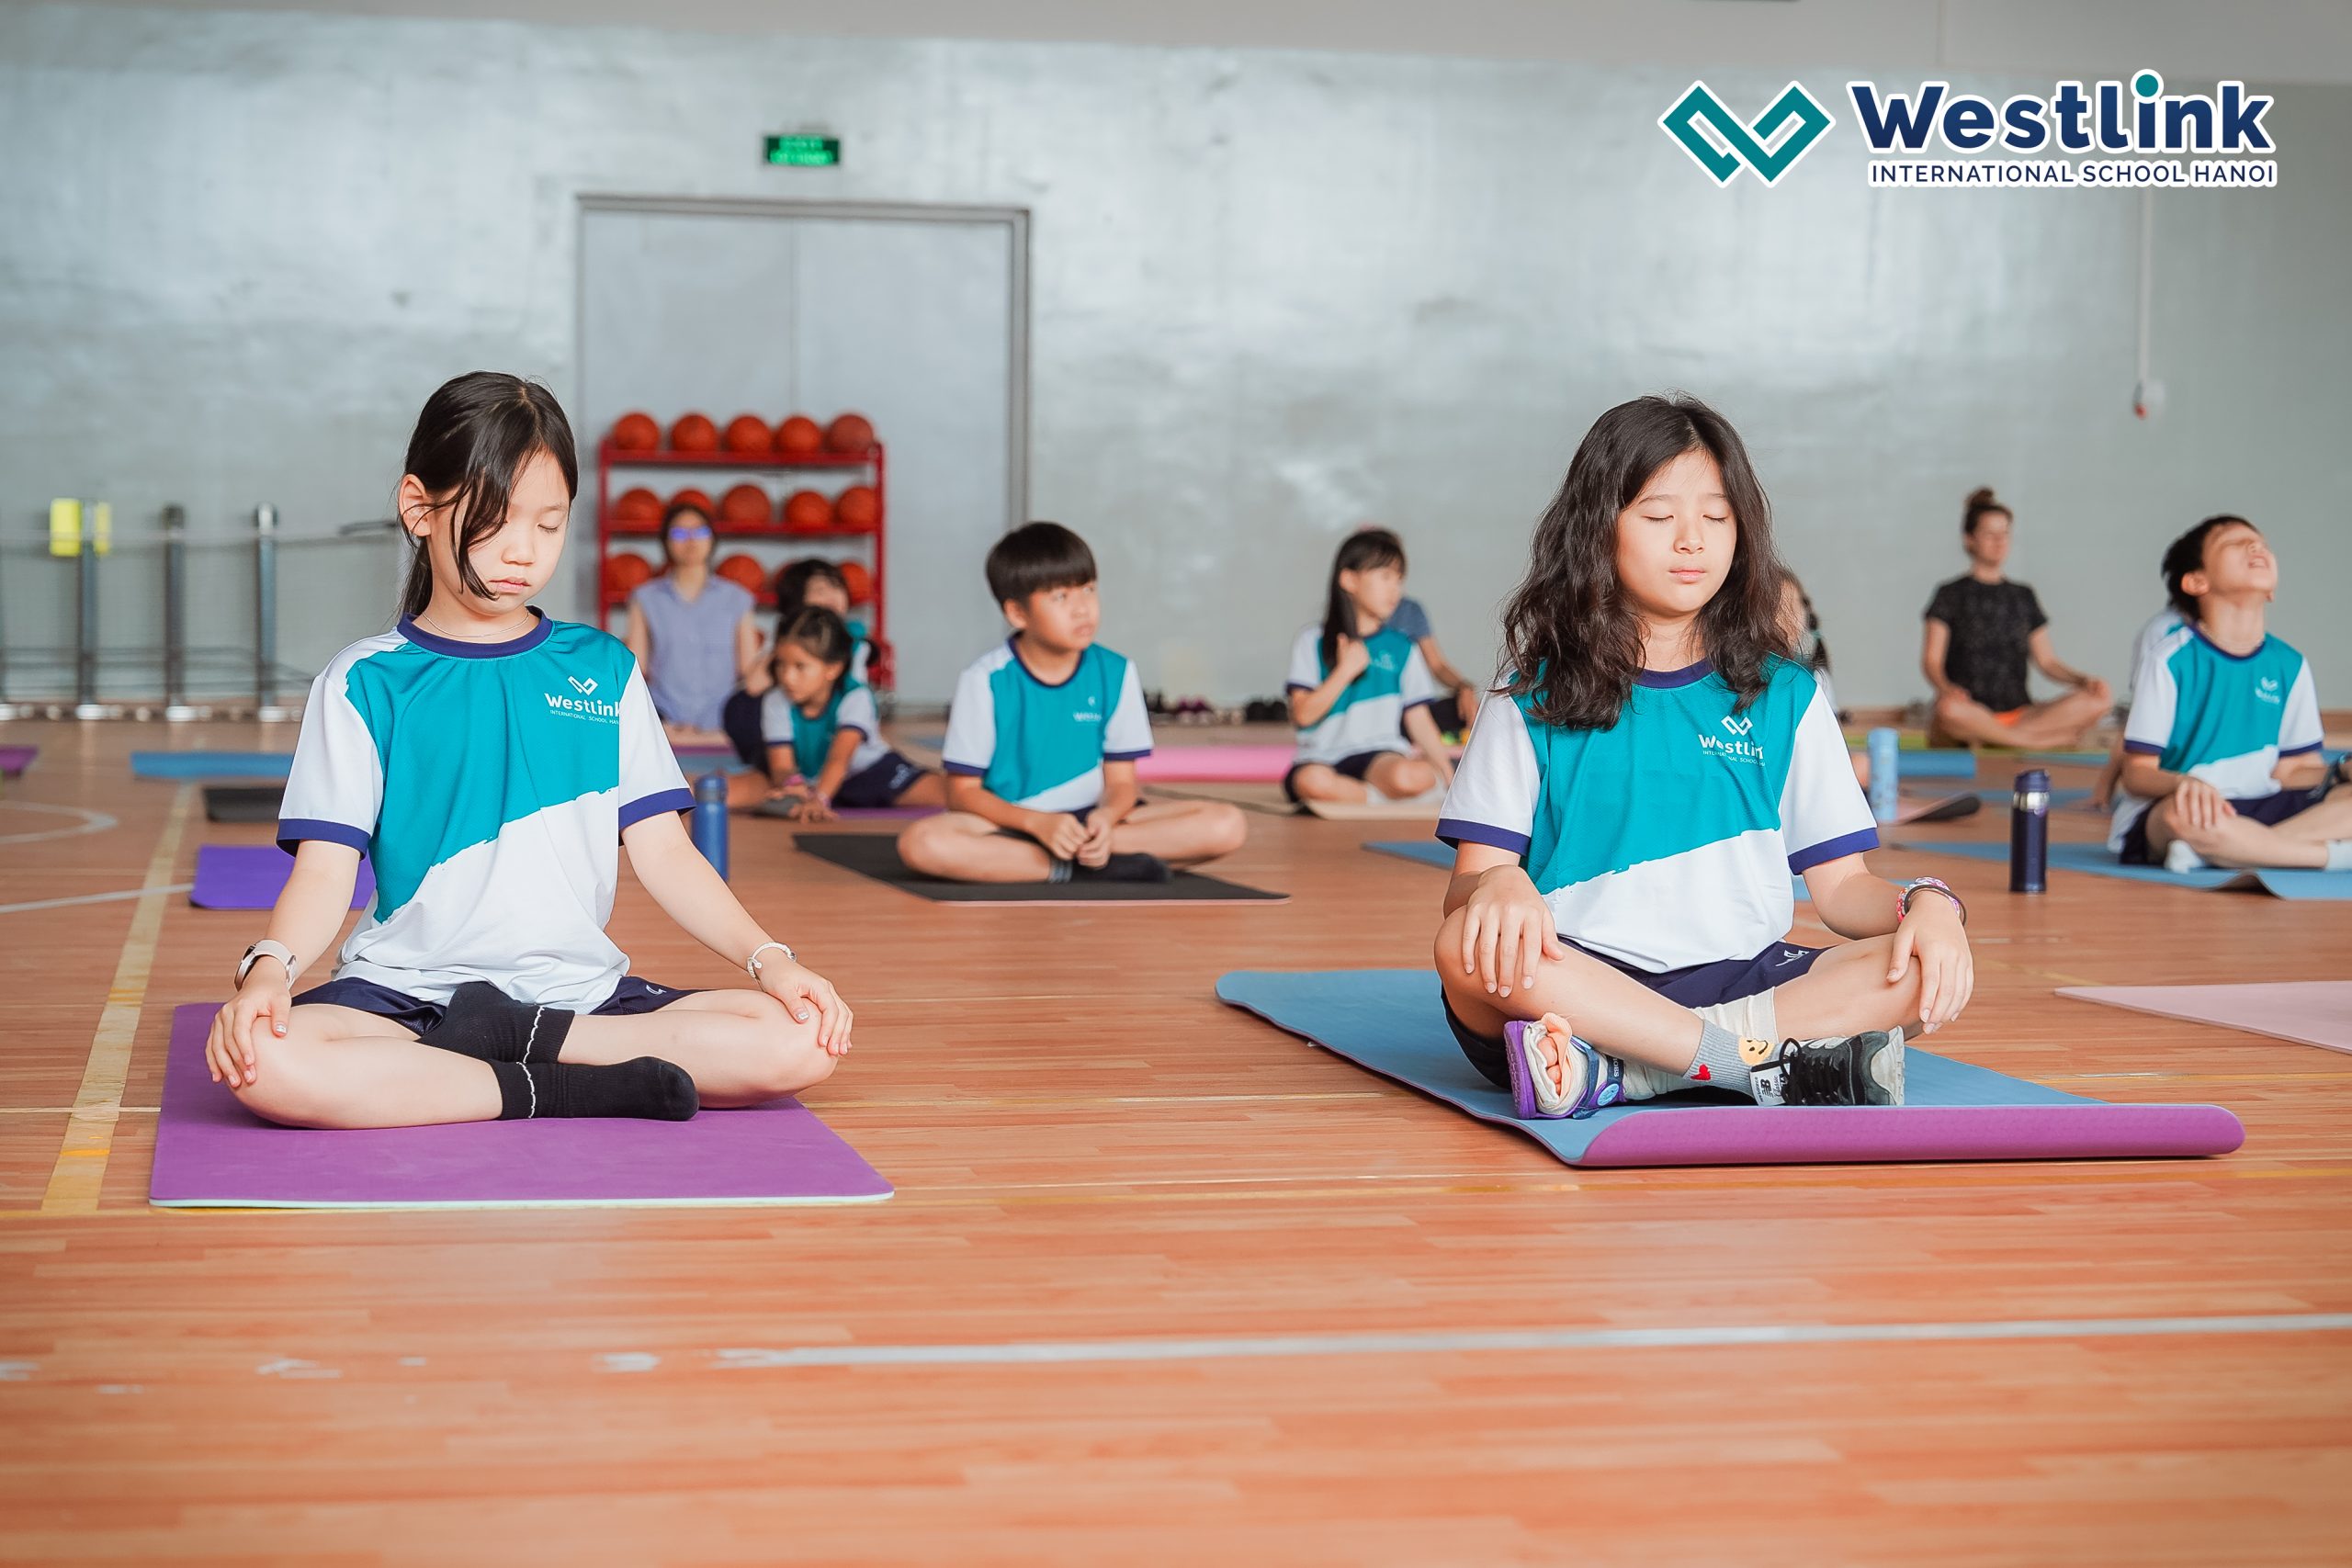 Let’s start the day with a Yoga morning at Westlink!